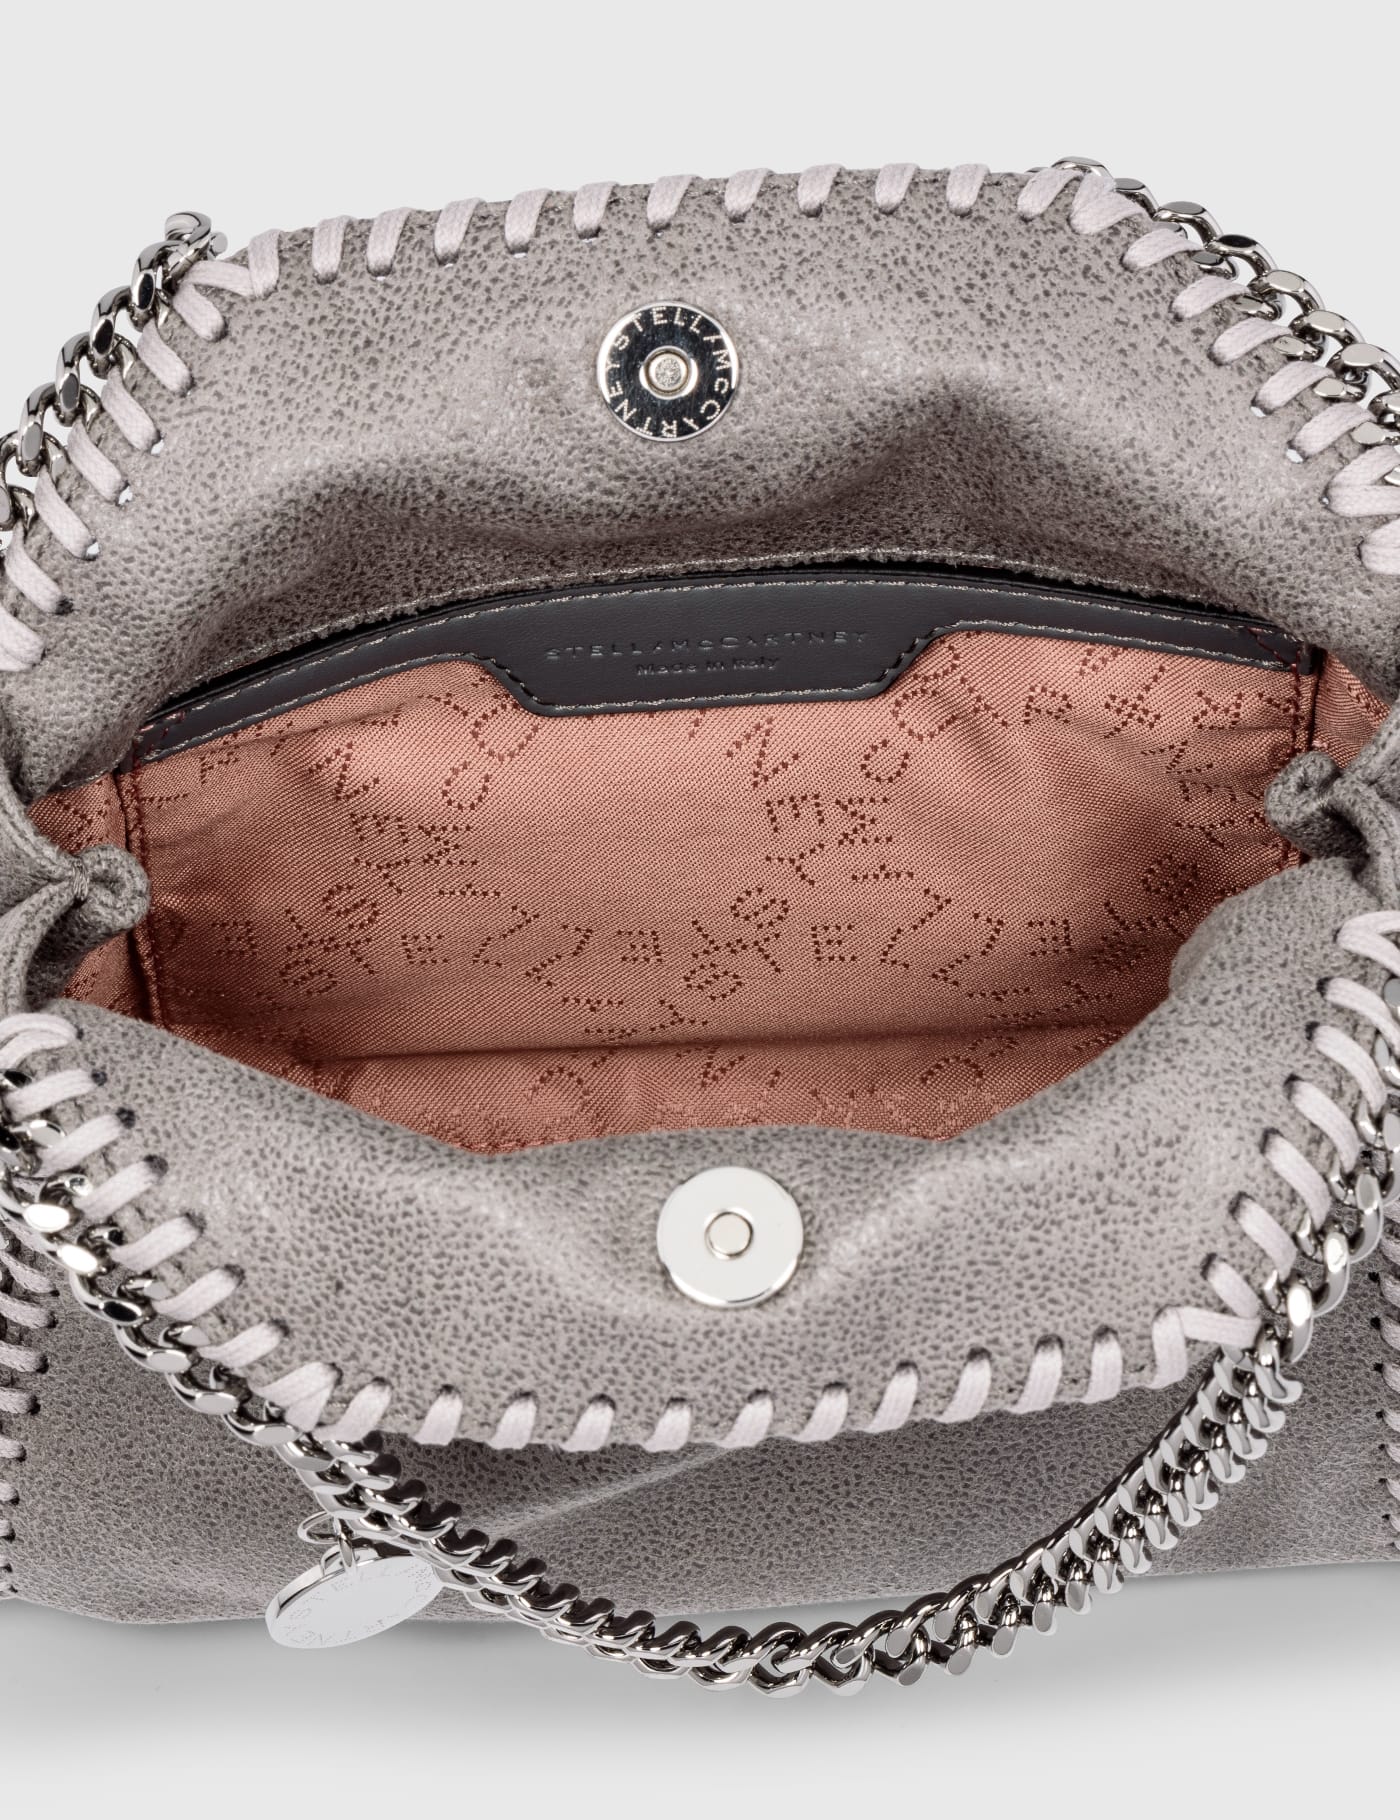 Stella McCartney - Tiny Falabella Tote | HBX - Globally Curated Fashion and  Lifestyle by Hypebeast